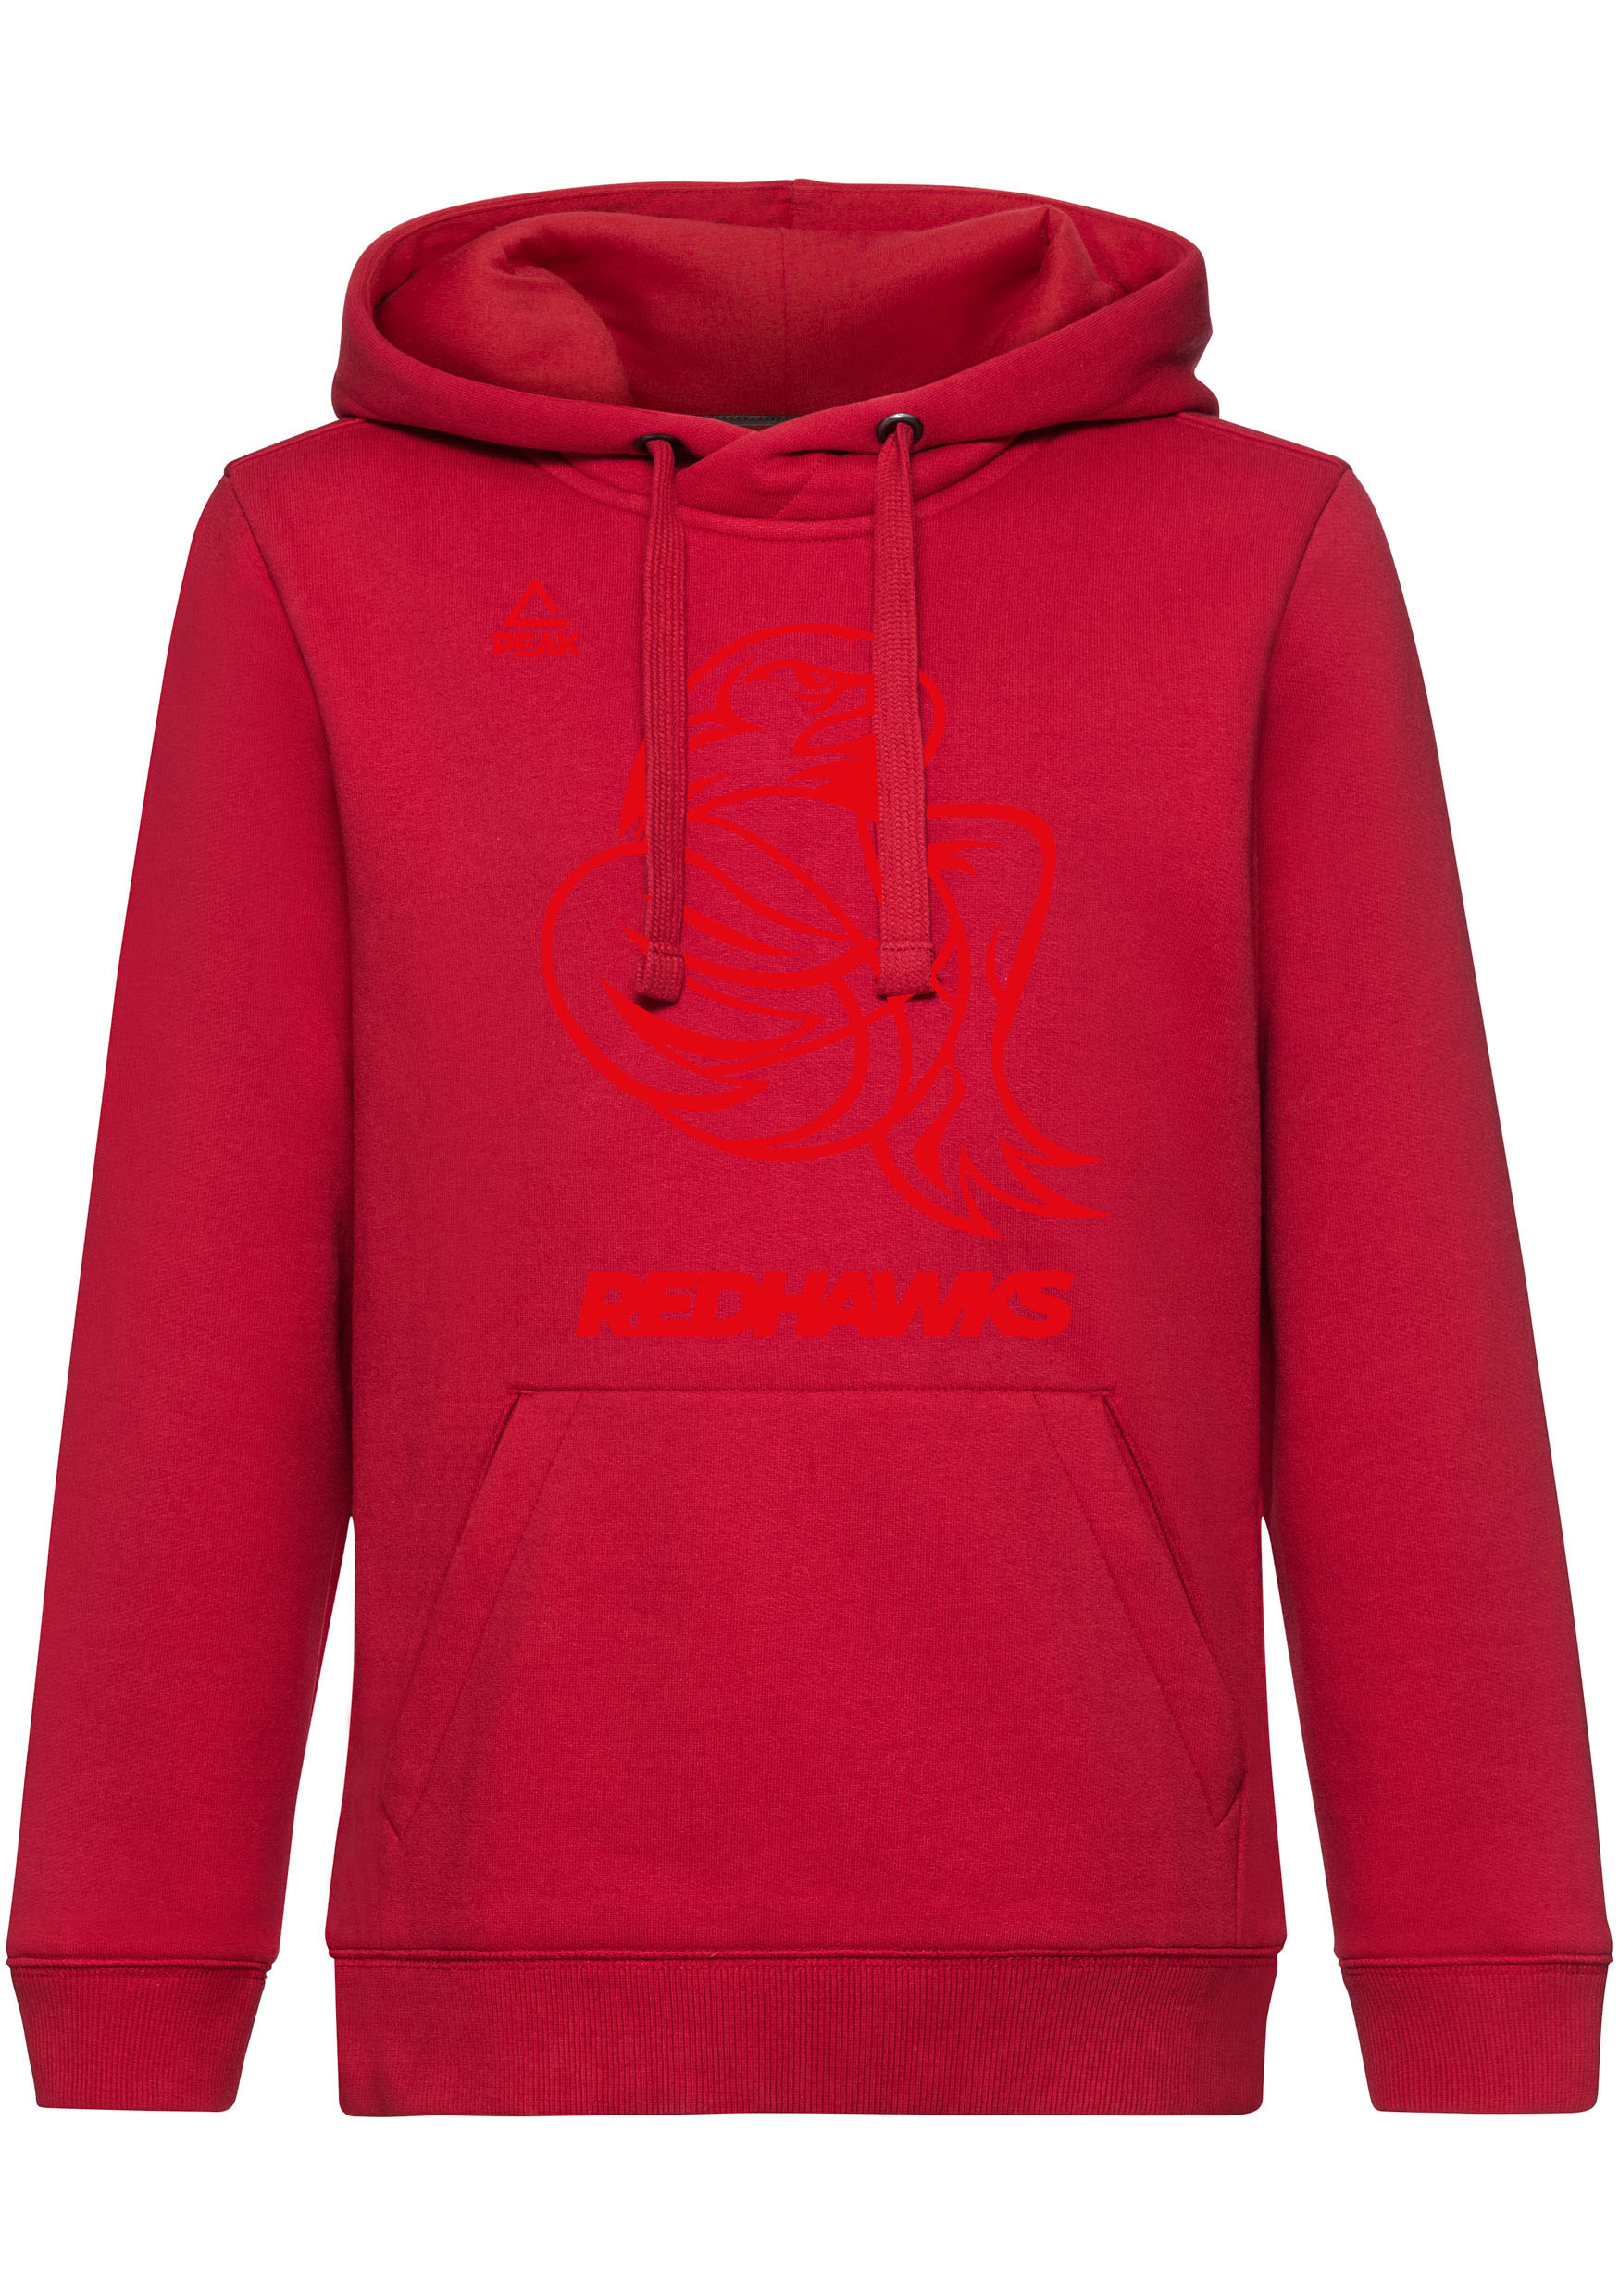 Red Hawks Hoodie Color Edition rot rot